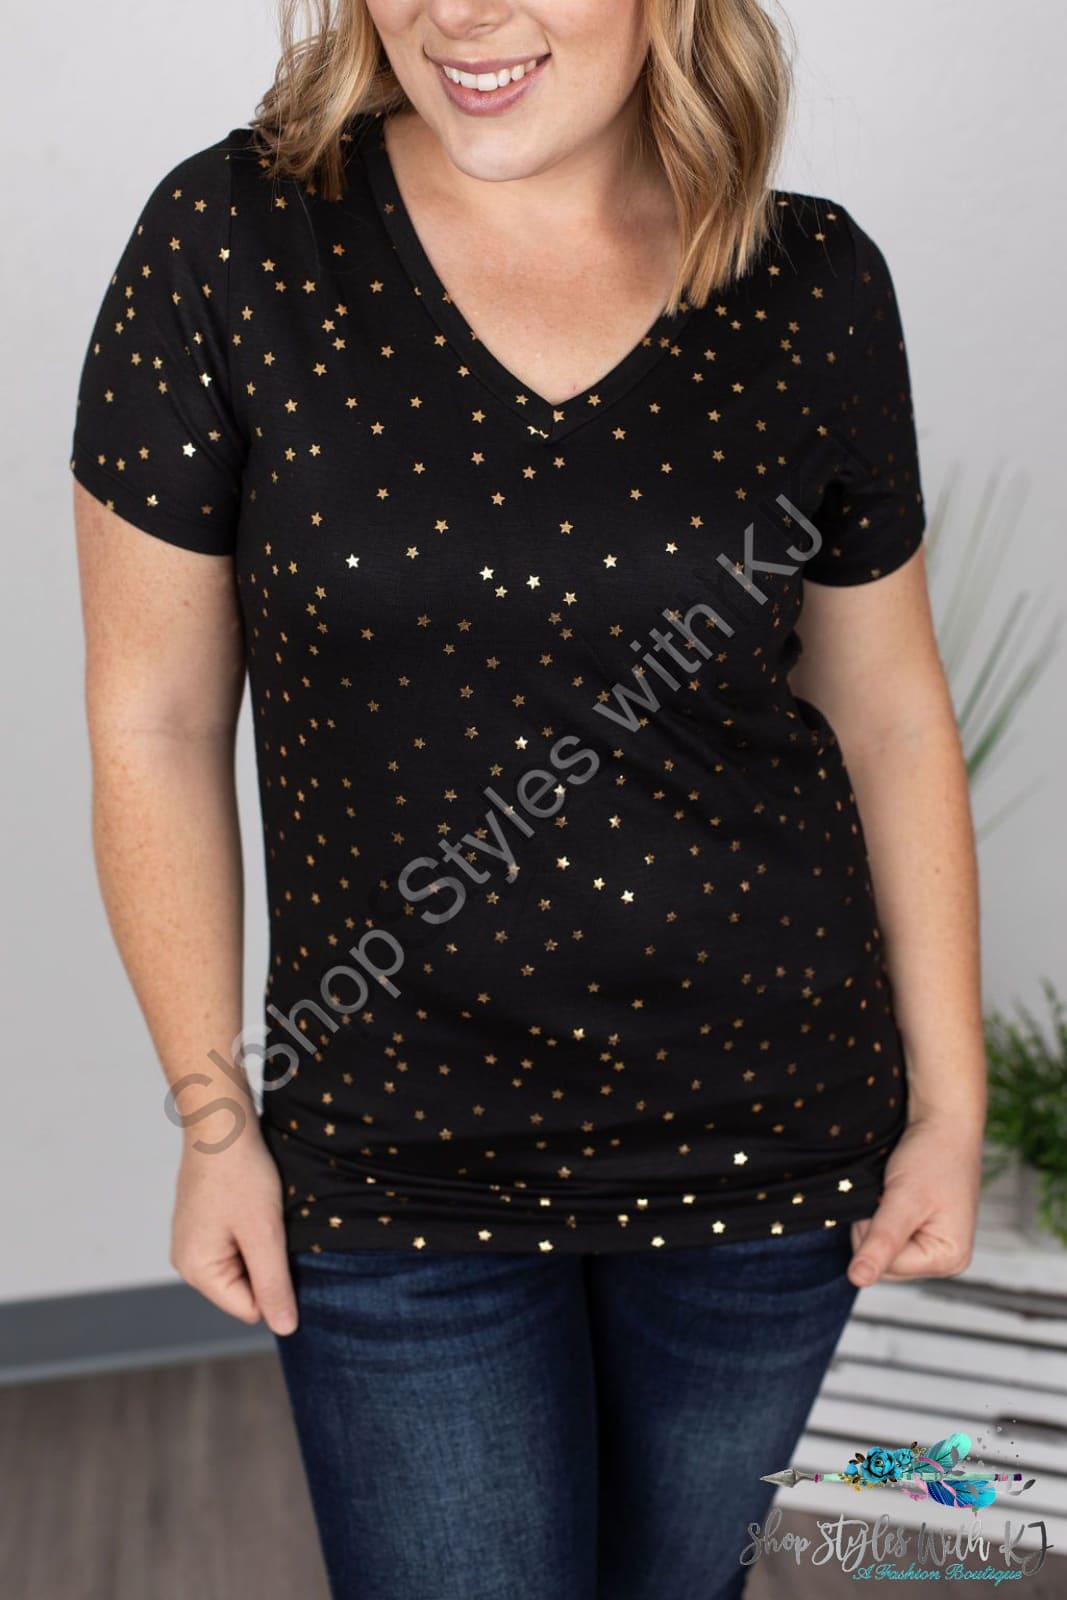 Size Xs Tee Deal - Multiple Colors Black Gold Stars